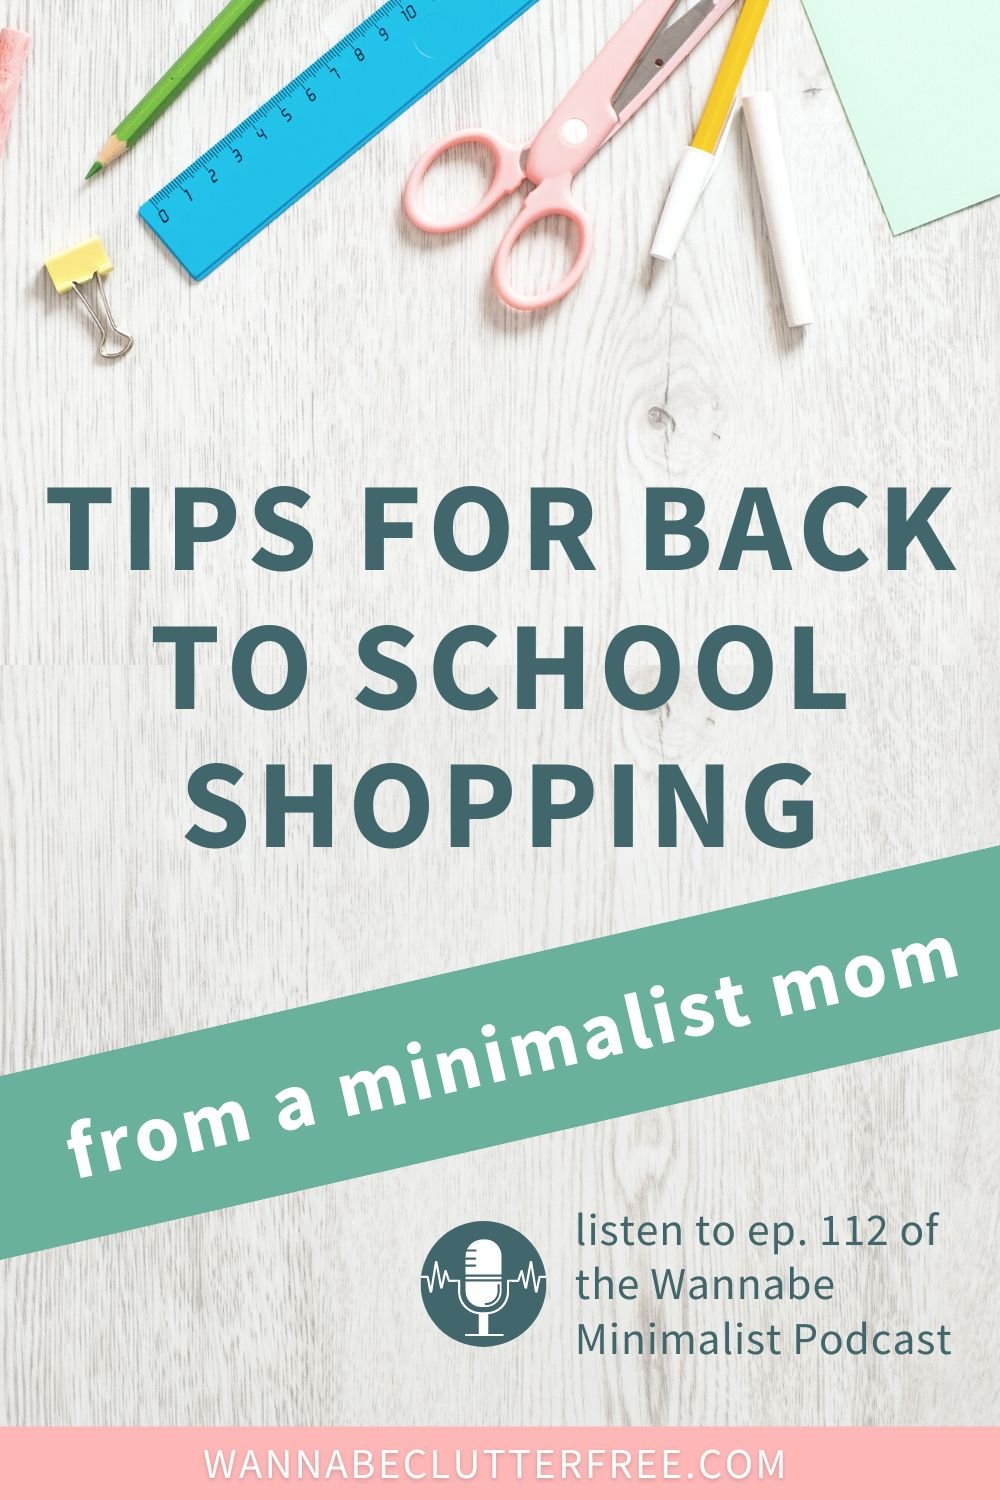 Tips for back to school shopping from a minimalist mom